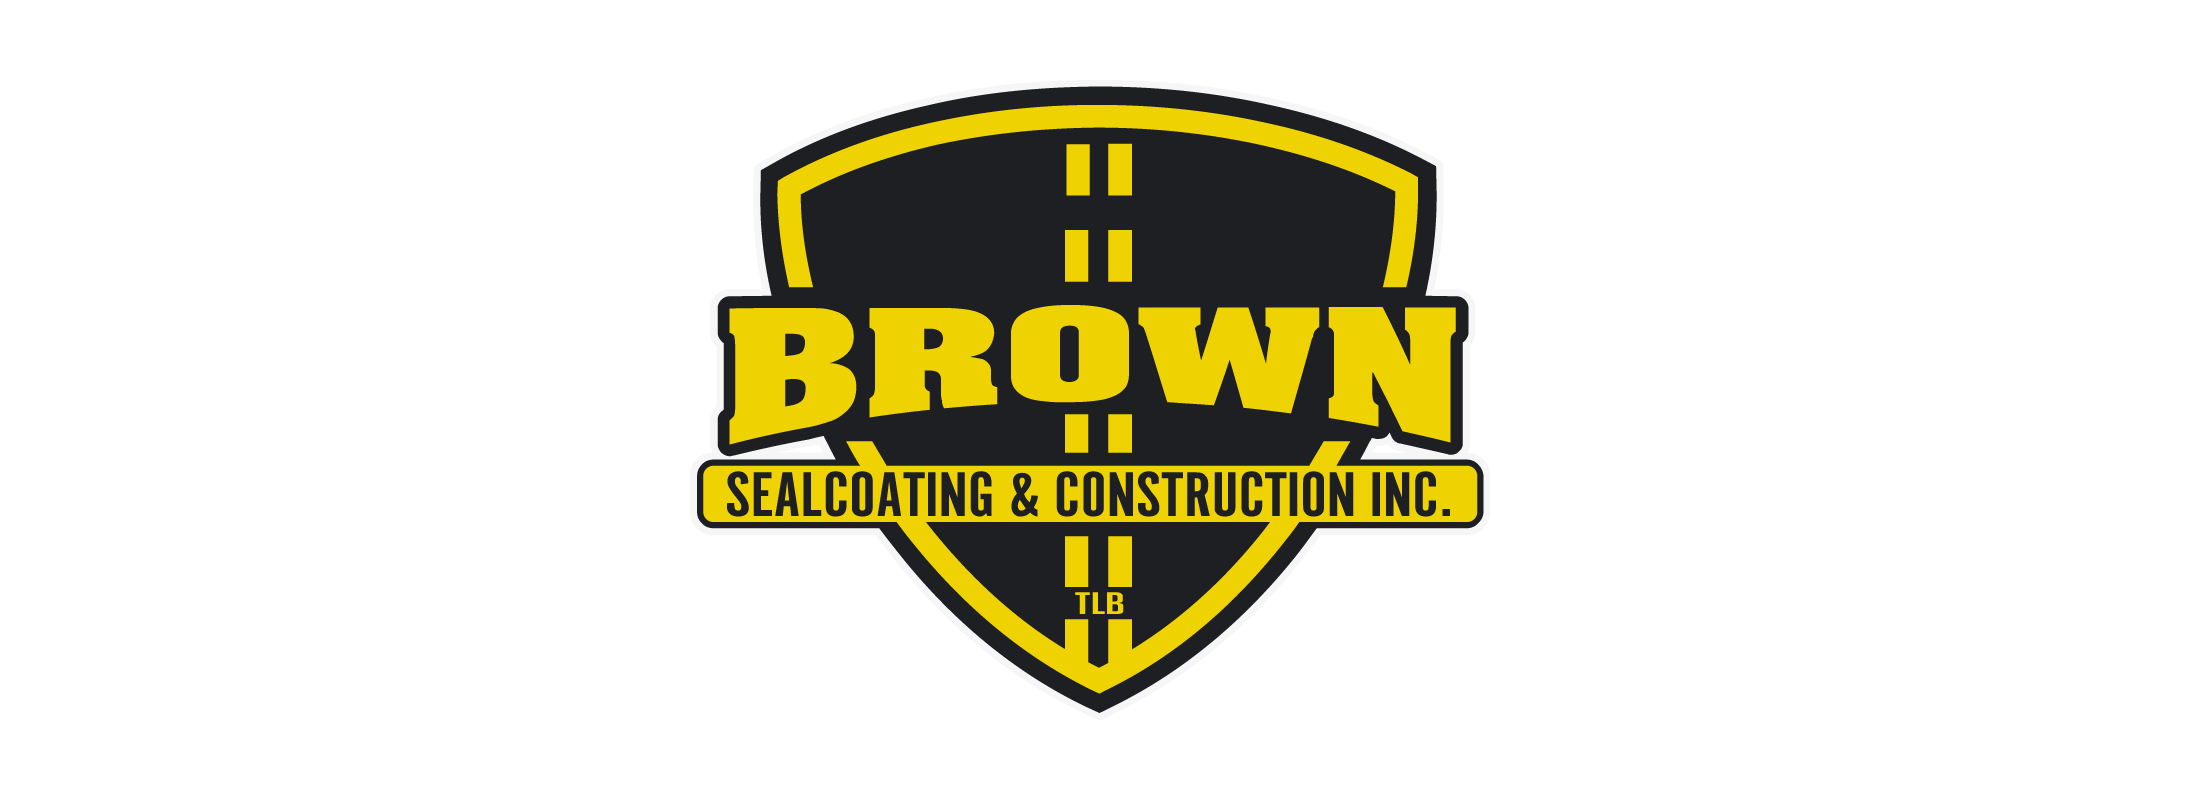 Sealcoating Logo - Brown Sealcoating & Construction Inc. | Commercial and Residential ...